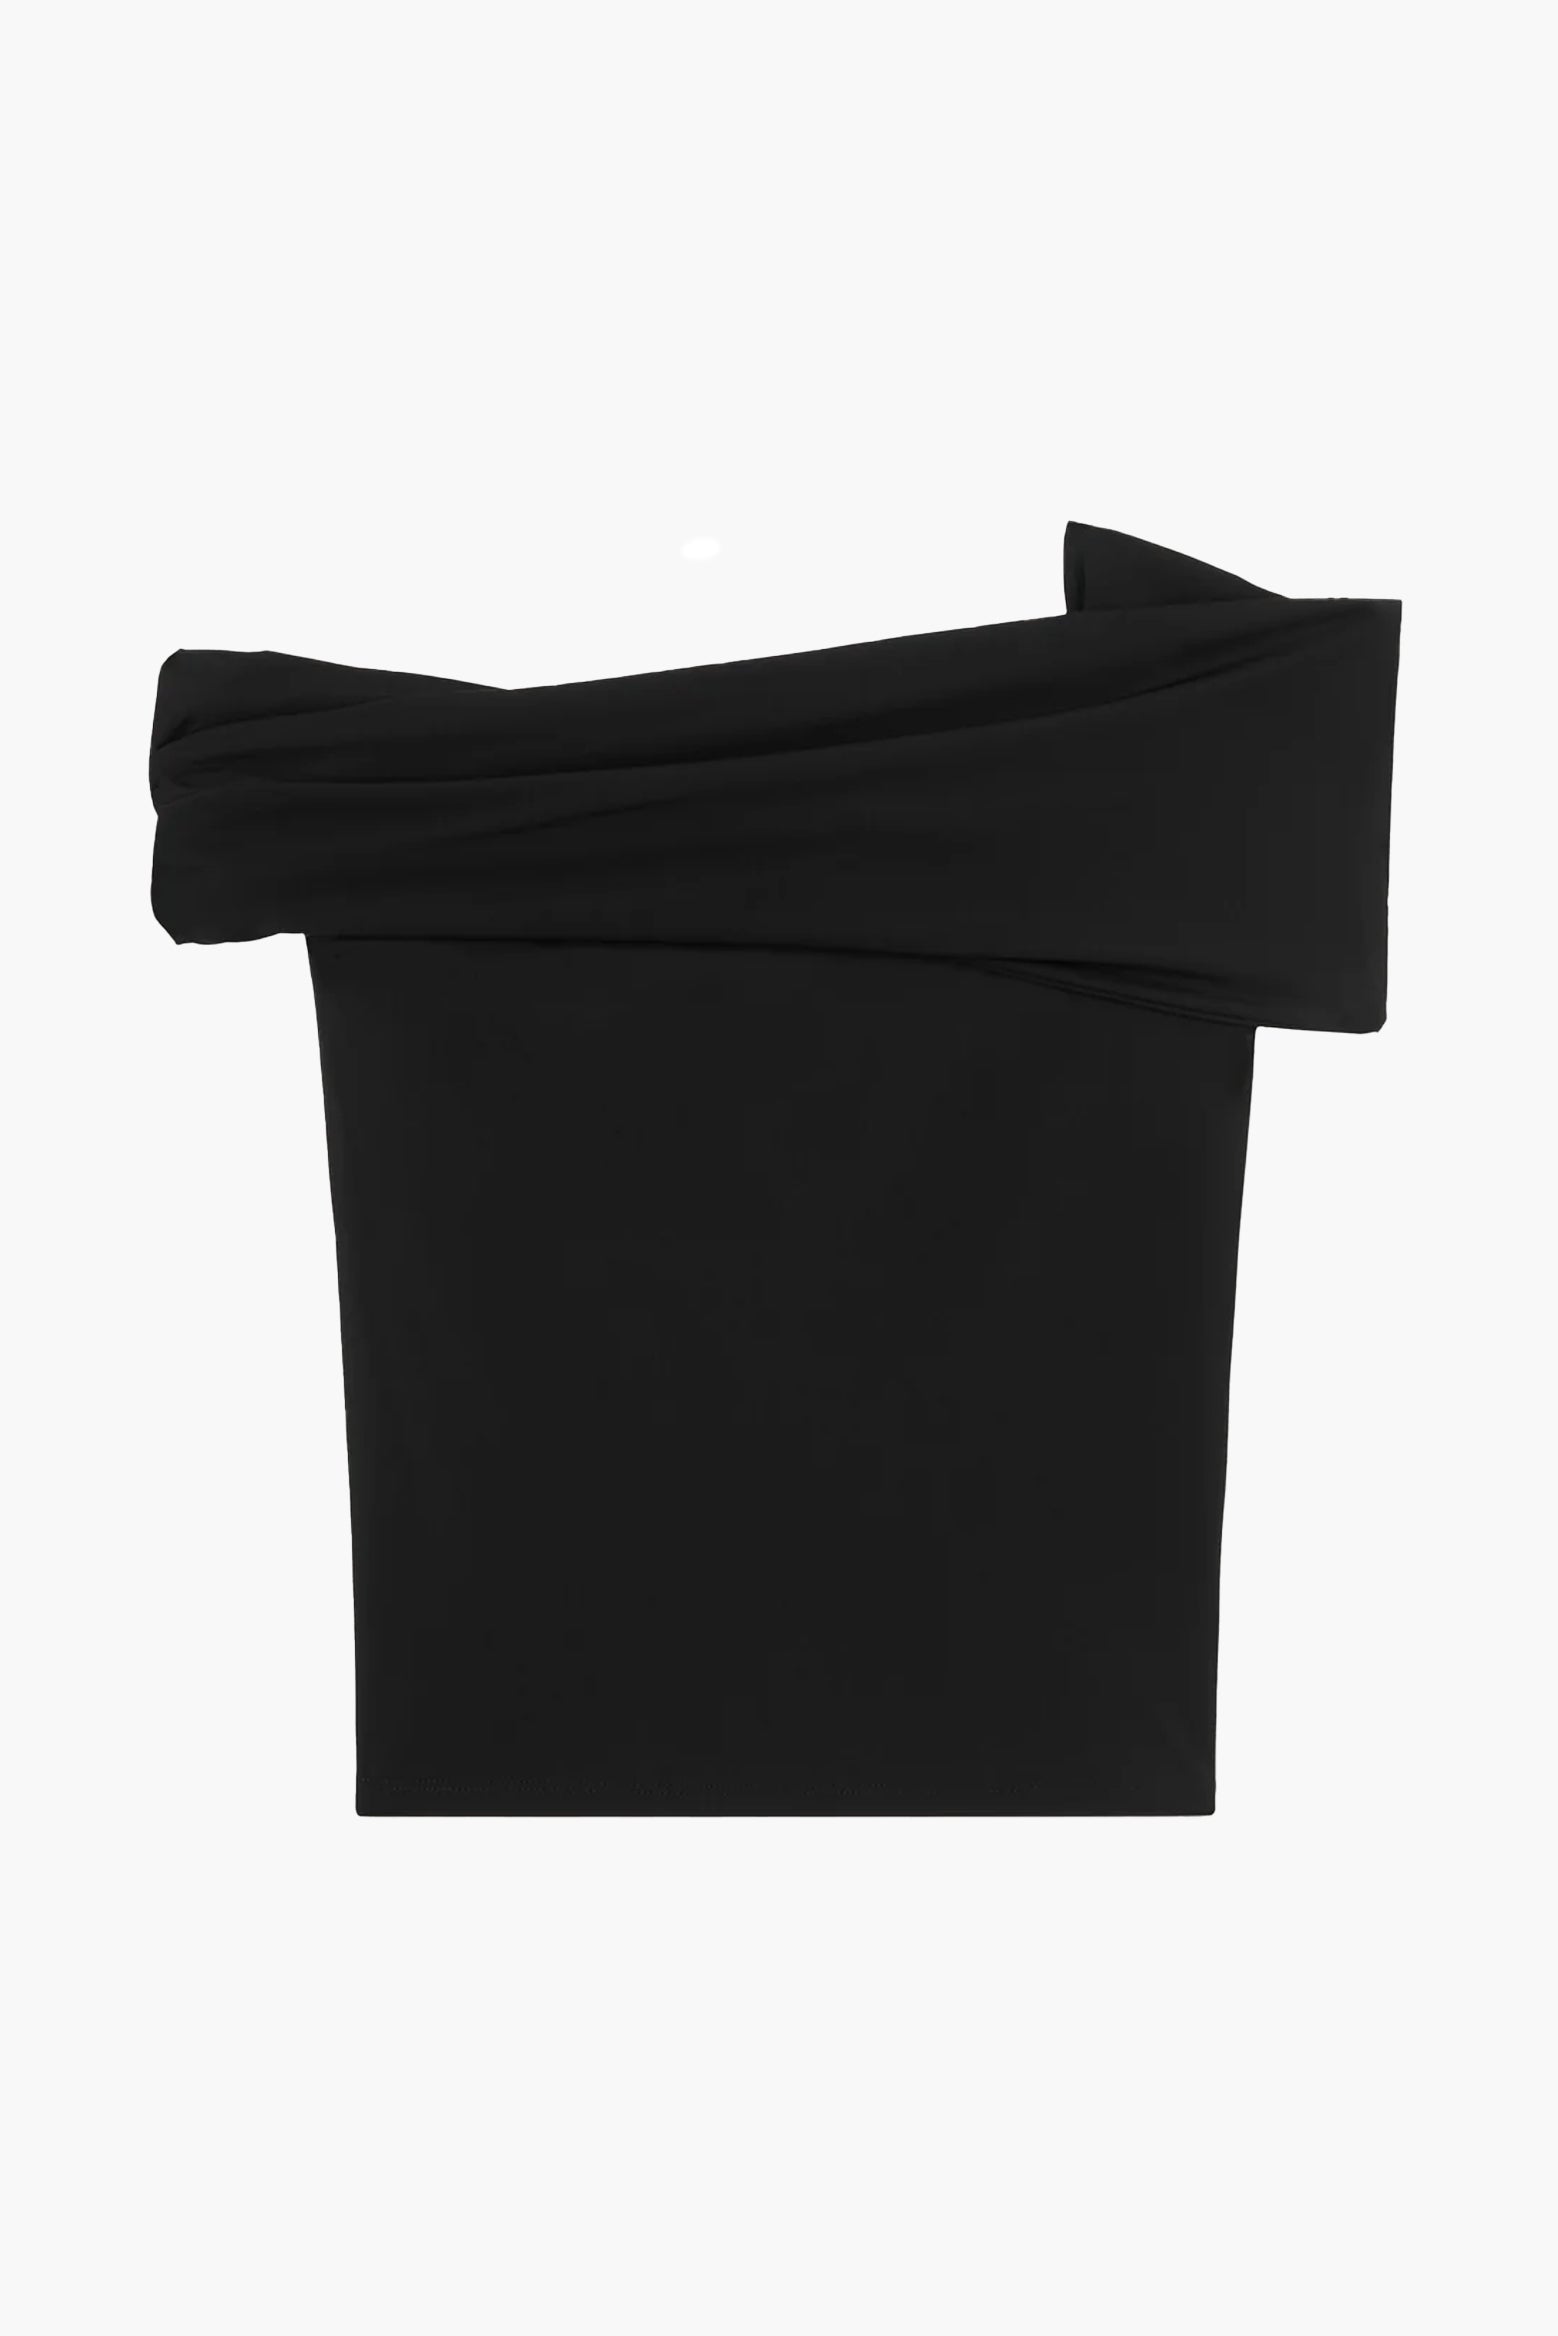 ROHE Asymmetrical Off Shoulder Top in Noir available at The New Trend Australia. 